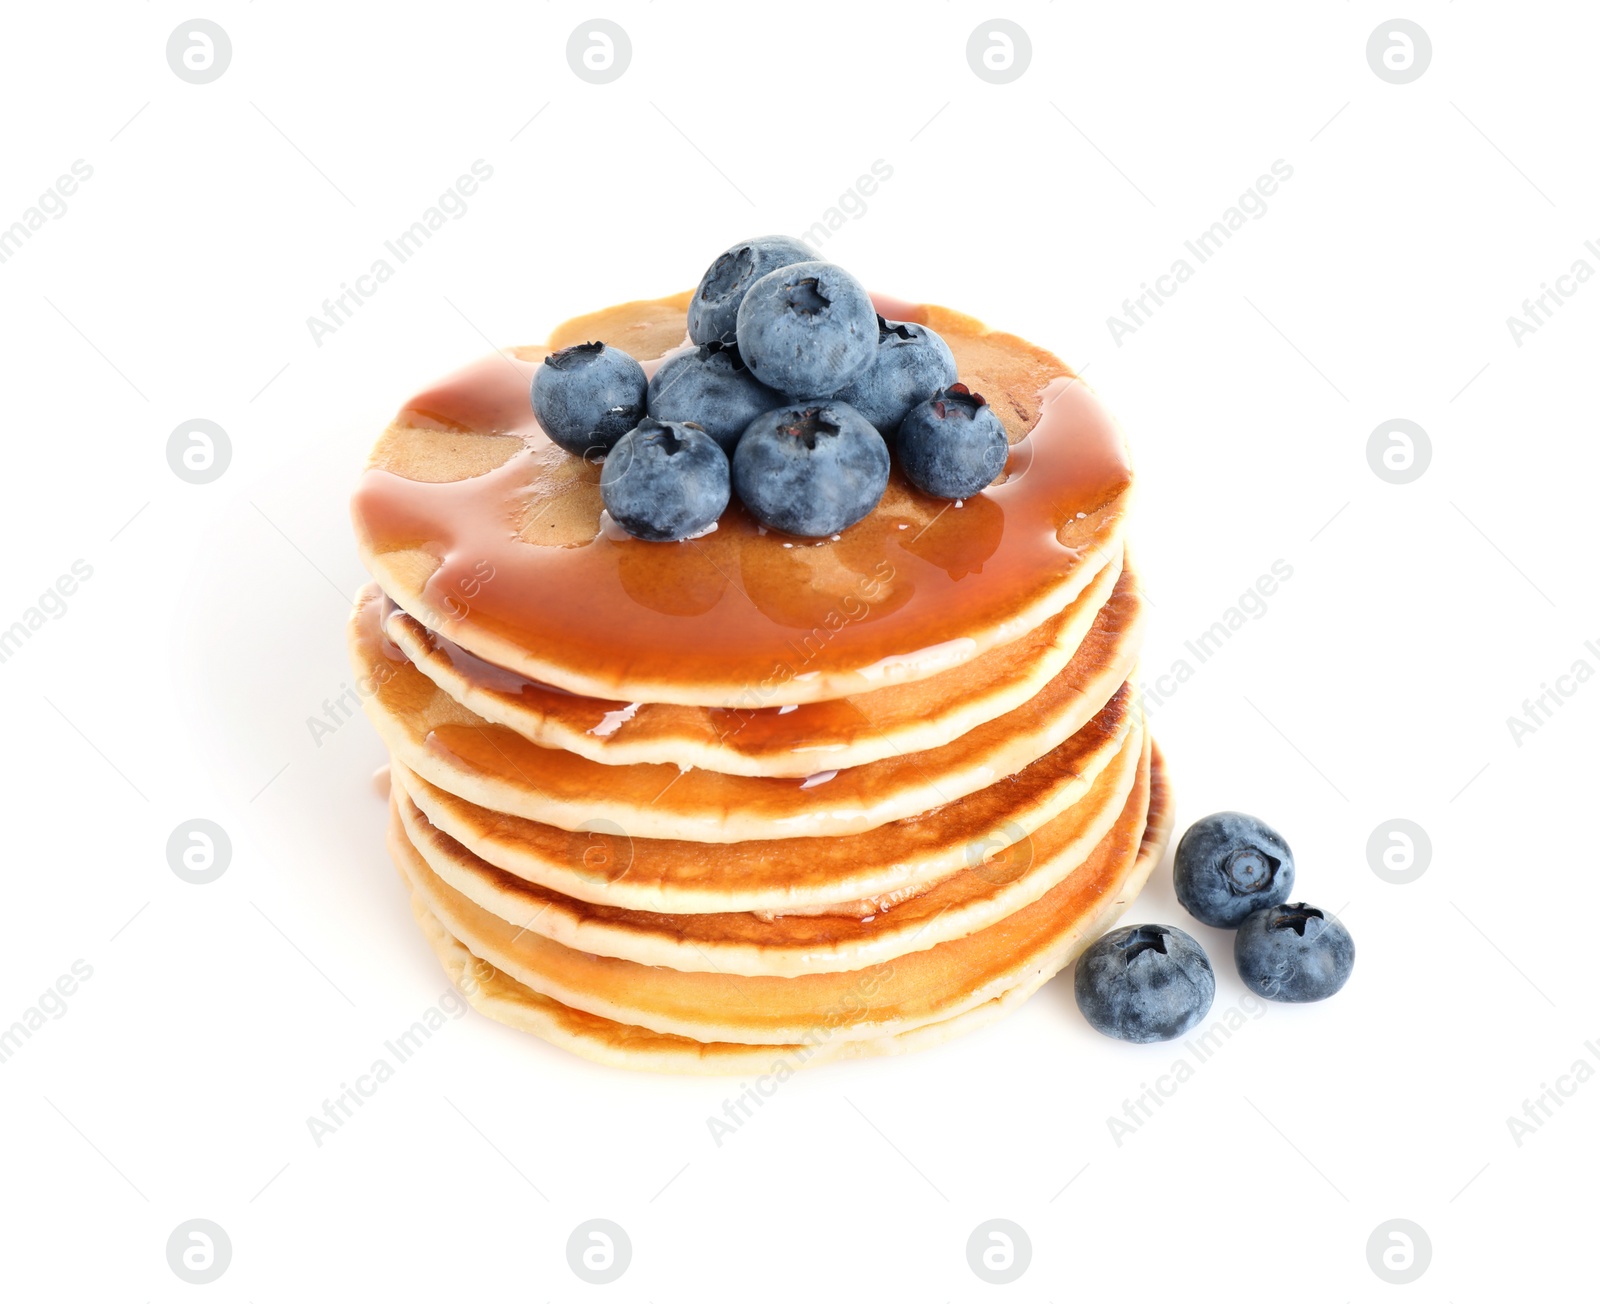 Photo of Stack of delicious pancakes with fresh blueberries and syrup on white background